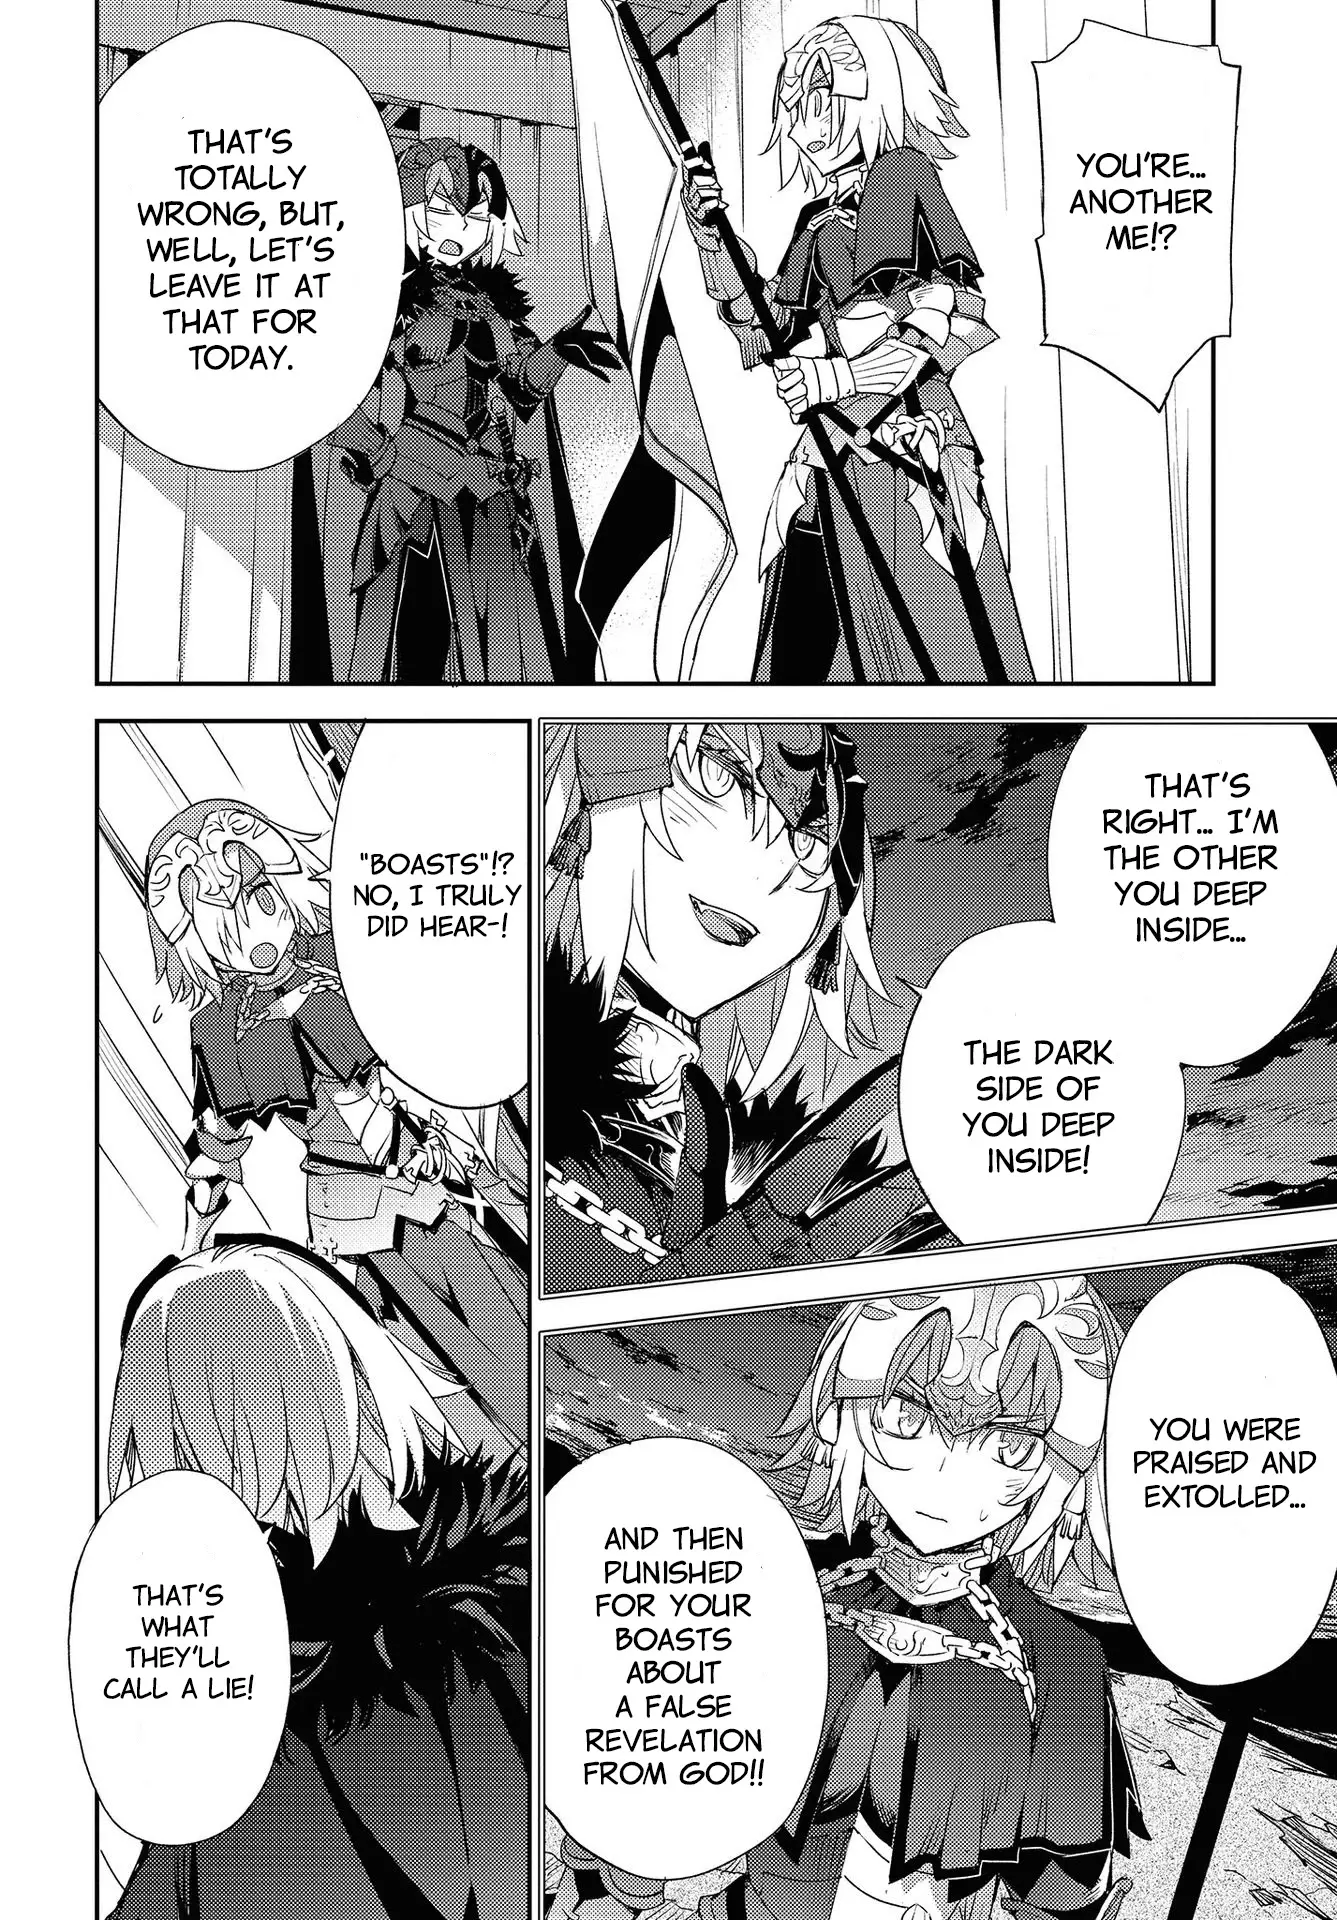 Fate/grand Order: Epic Of Remnant - Subspecies Singularity Iv: Taboo Advent Salem: Salem Of Heresy - 13 page 19